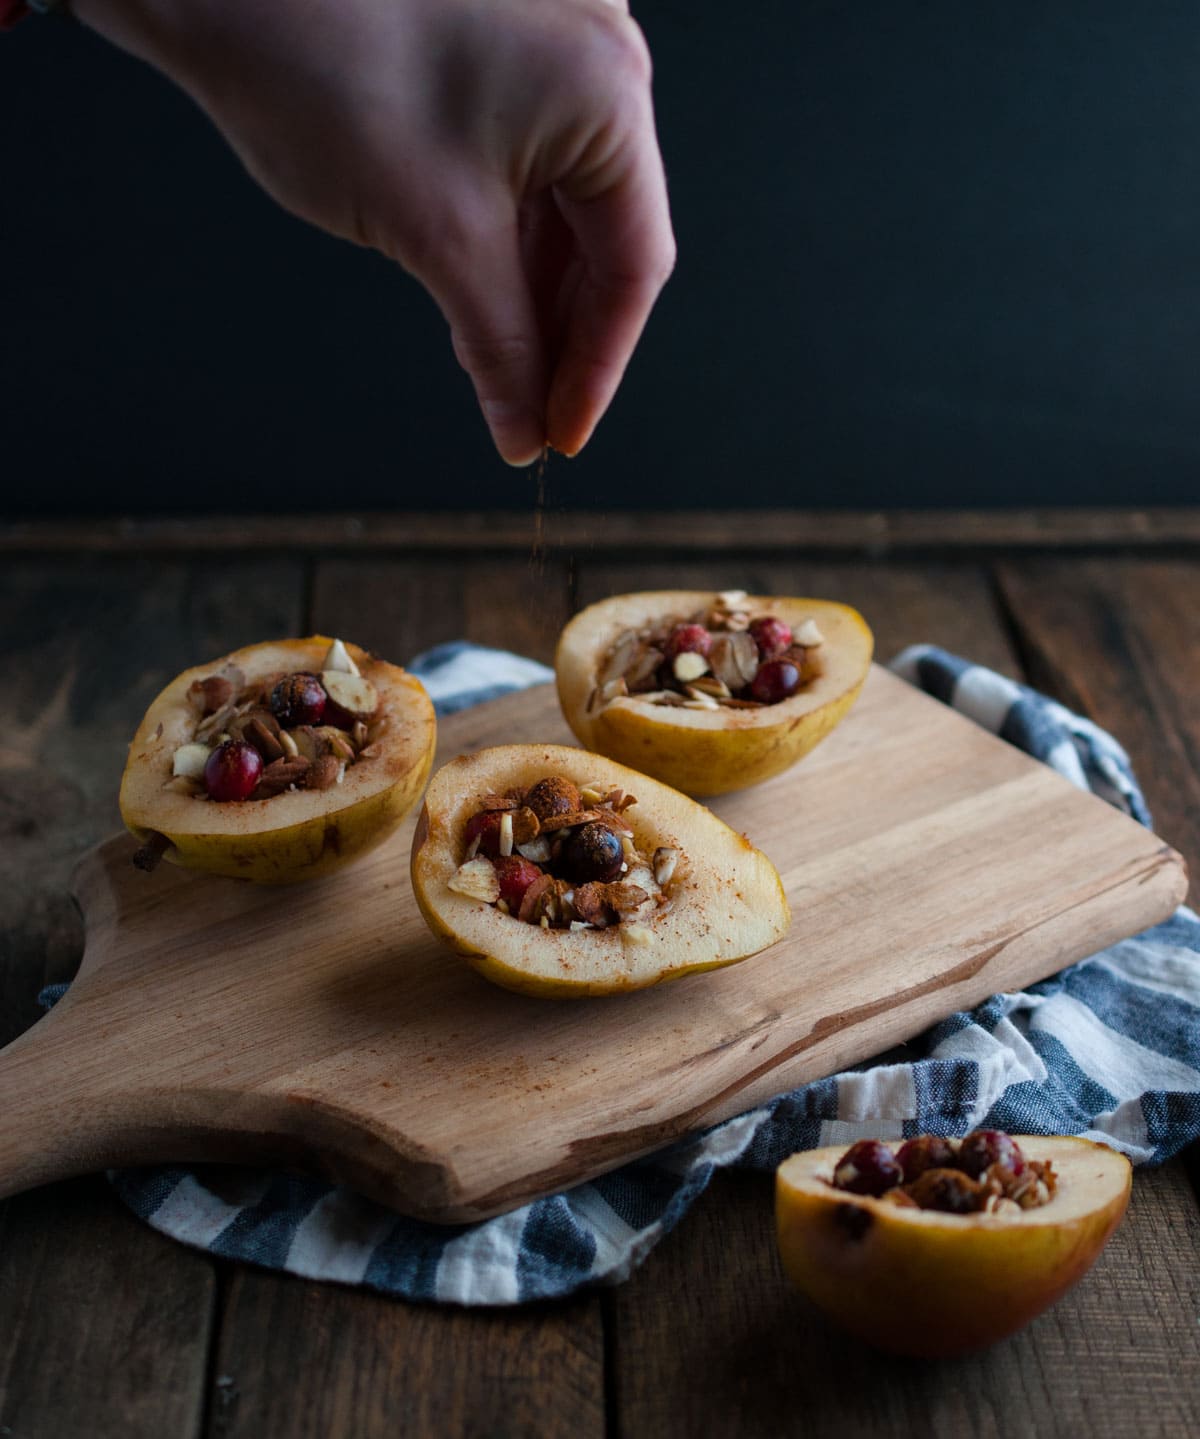 These baked pears with honey and almonds are the perfect healthy dessert for the holidays with cranberries and a nutty crunch all for 200 calories! 